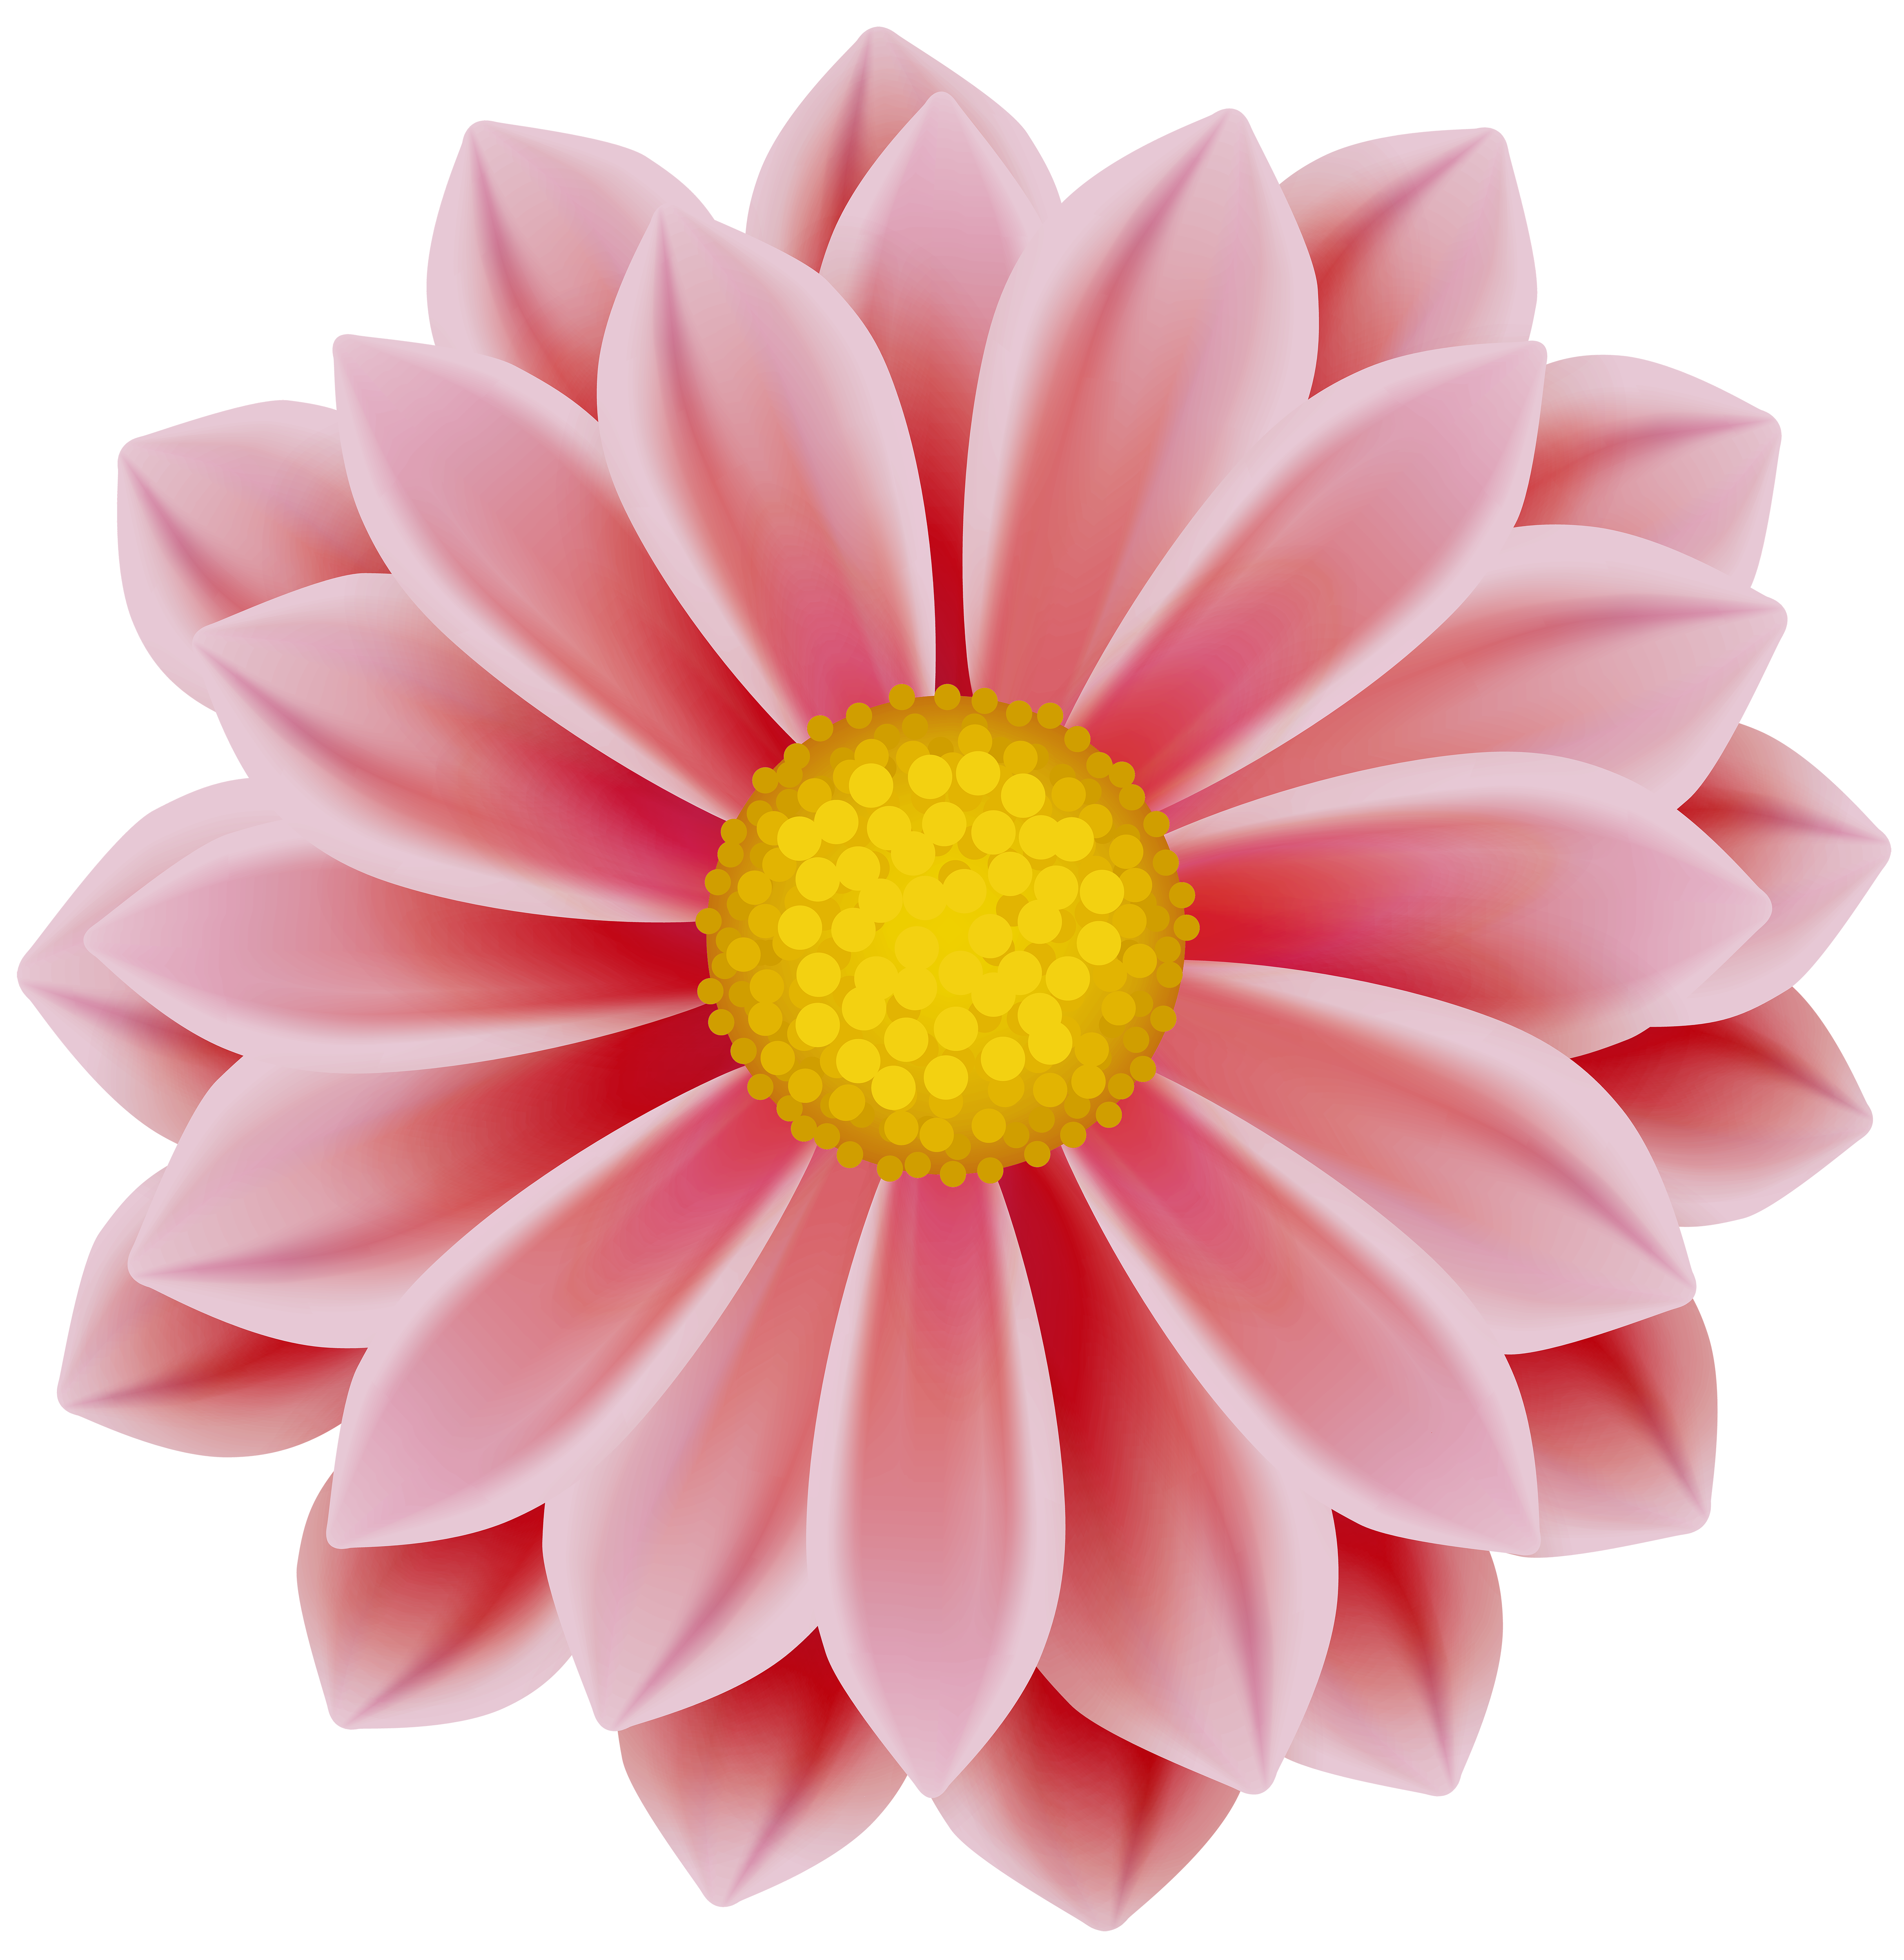 Flower PNG Clip Art | Gallery Yopriceville - High-Quality ...